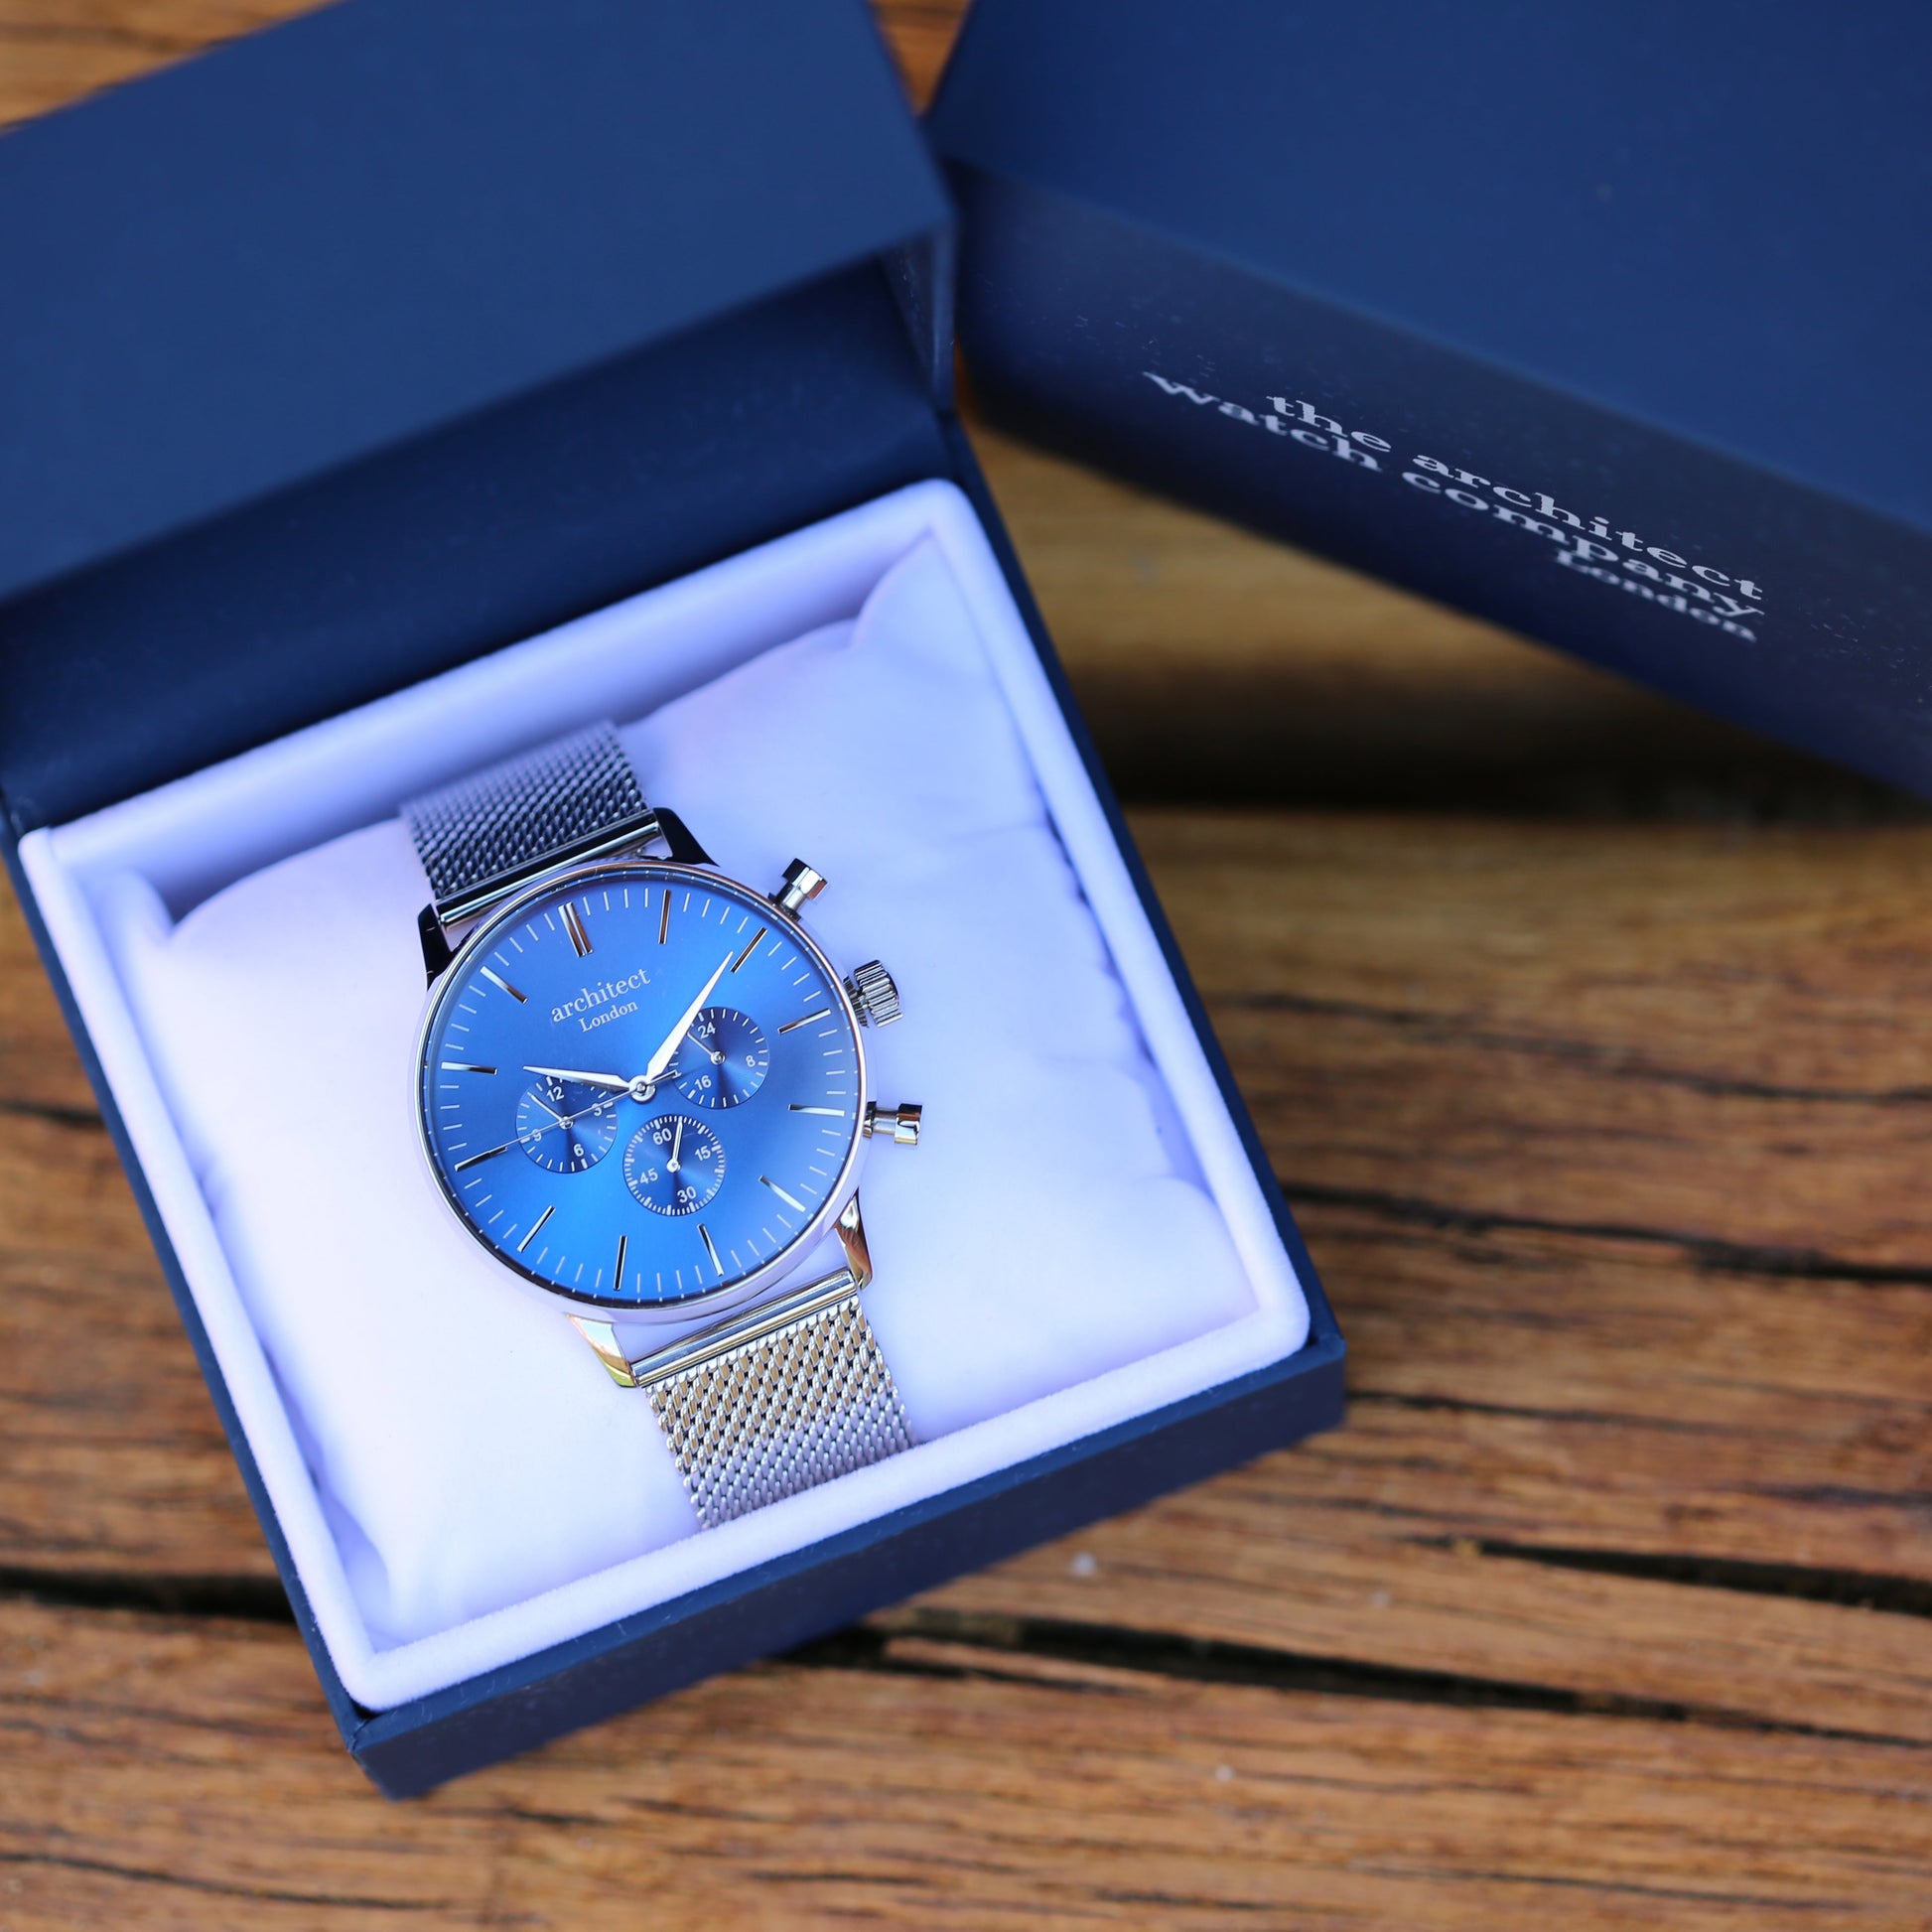 Personalized Men's Watches - Men's Handwriting Engraved Watch In Blue Face Silver 